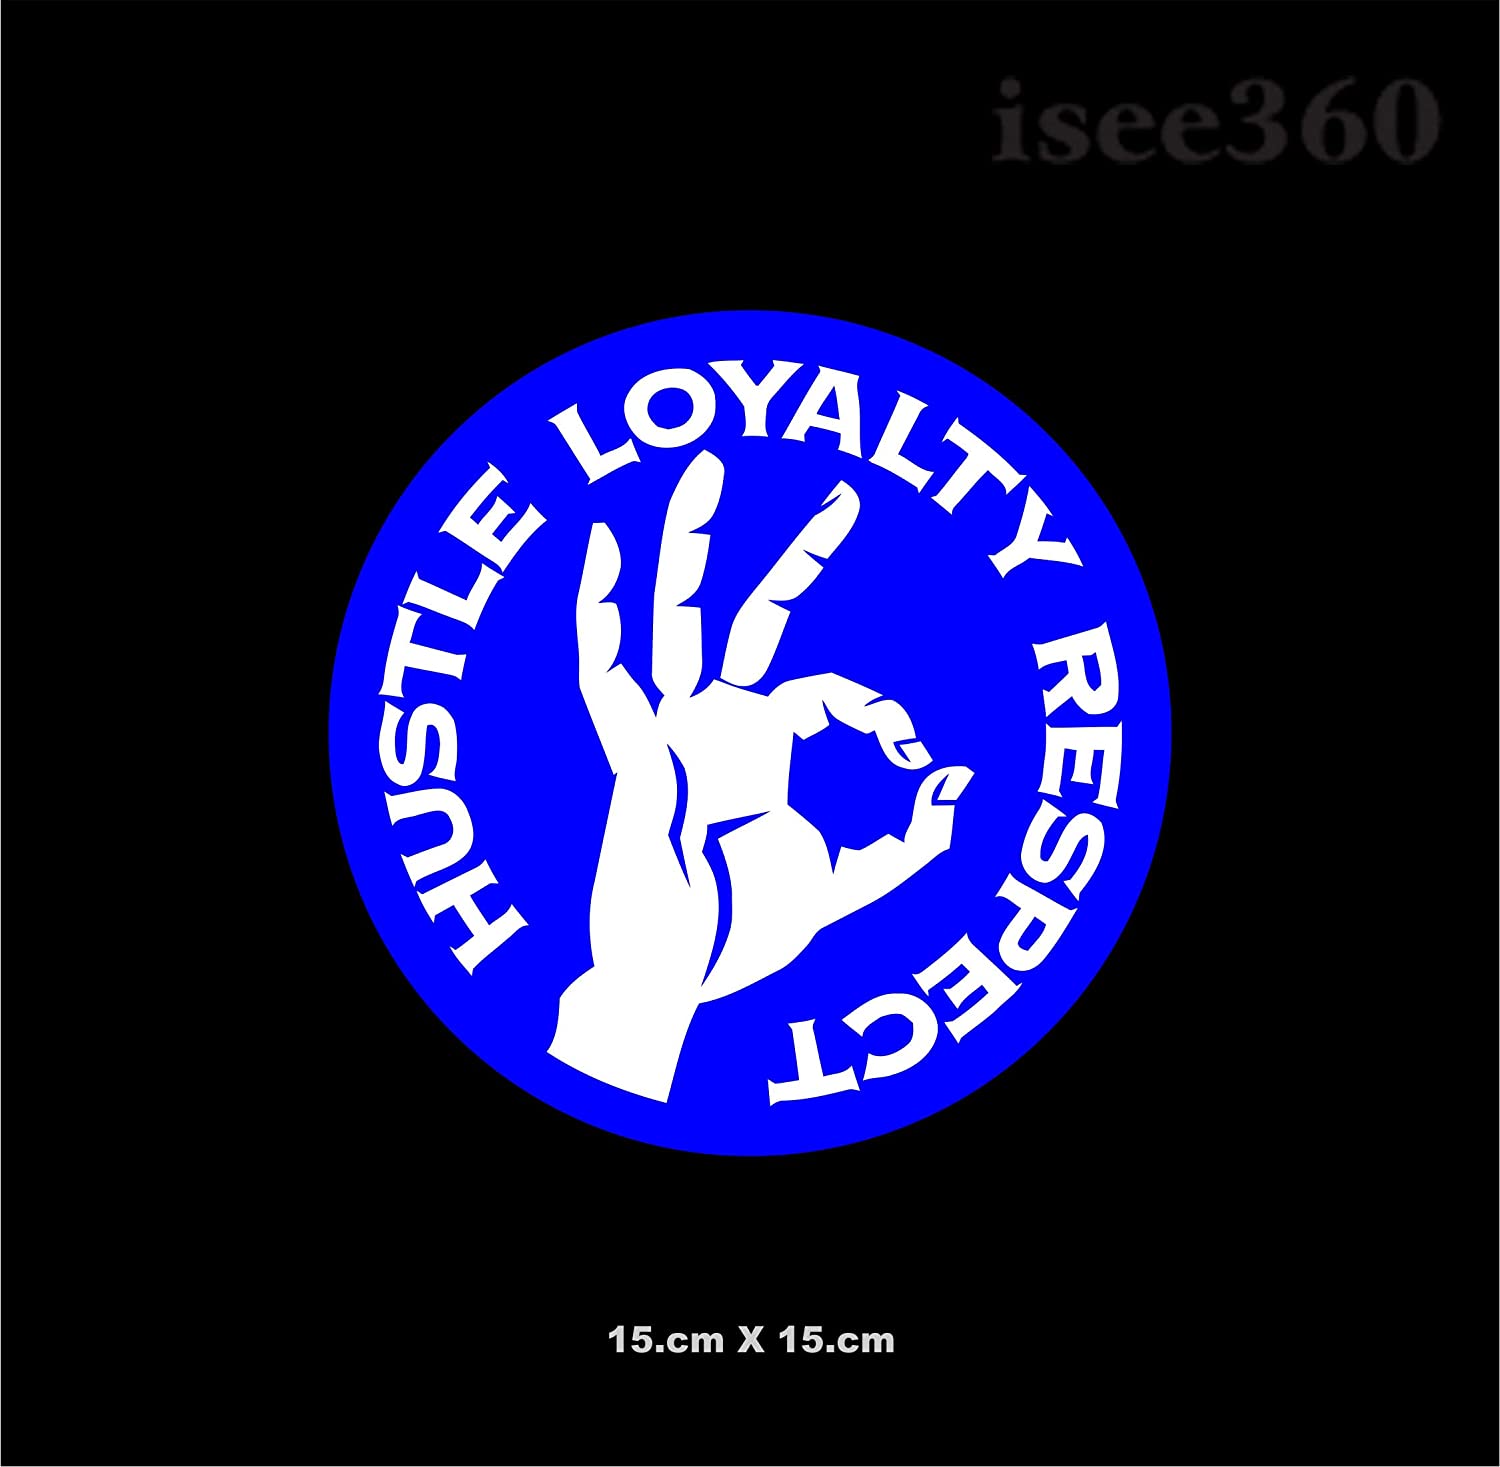 isee360 John Cena Hustle Loyalty Respect Stickers & Decals for Car